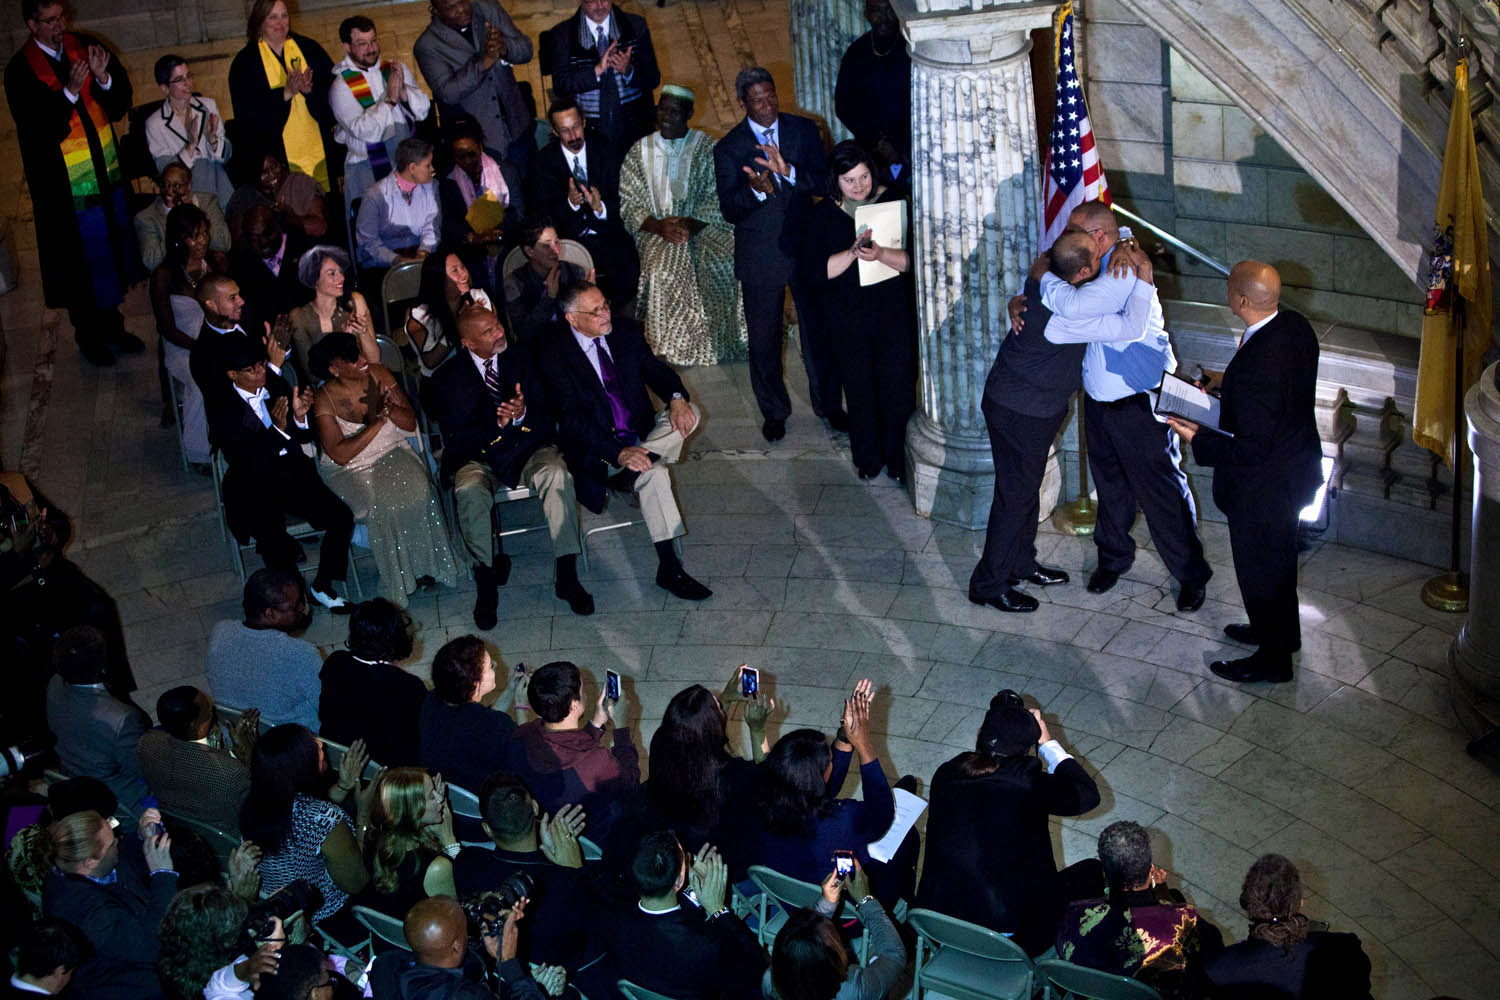 Oct. 21, 2013. Alexander Padilla and Anthony Arenas hug each other after being married by Newark Mayor and newly-elected U.S. Senator Cory Booker at City Hall in the early morning hours in Newark, N.J.